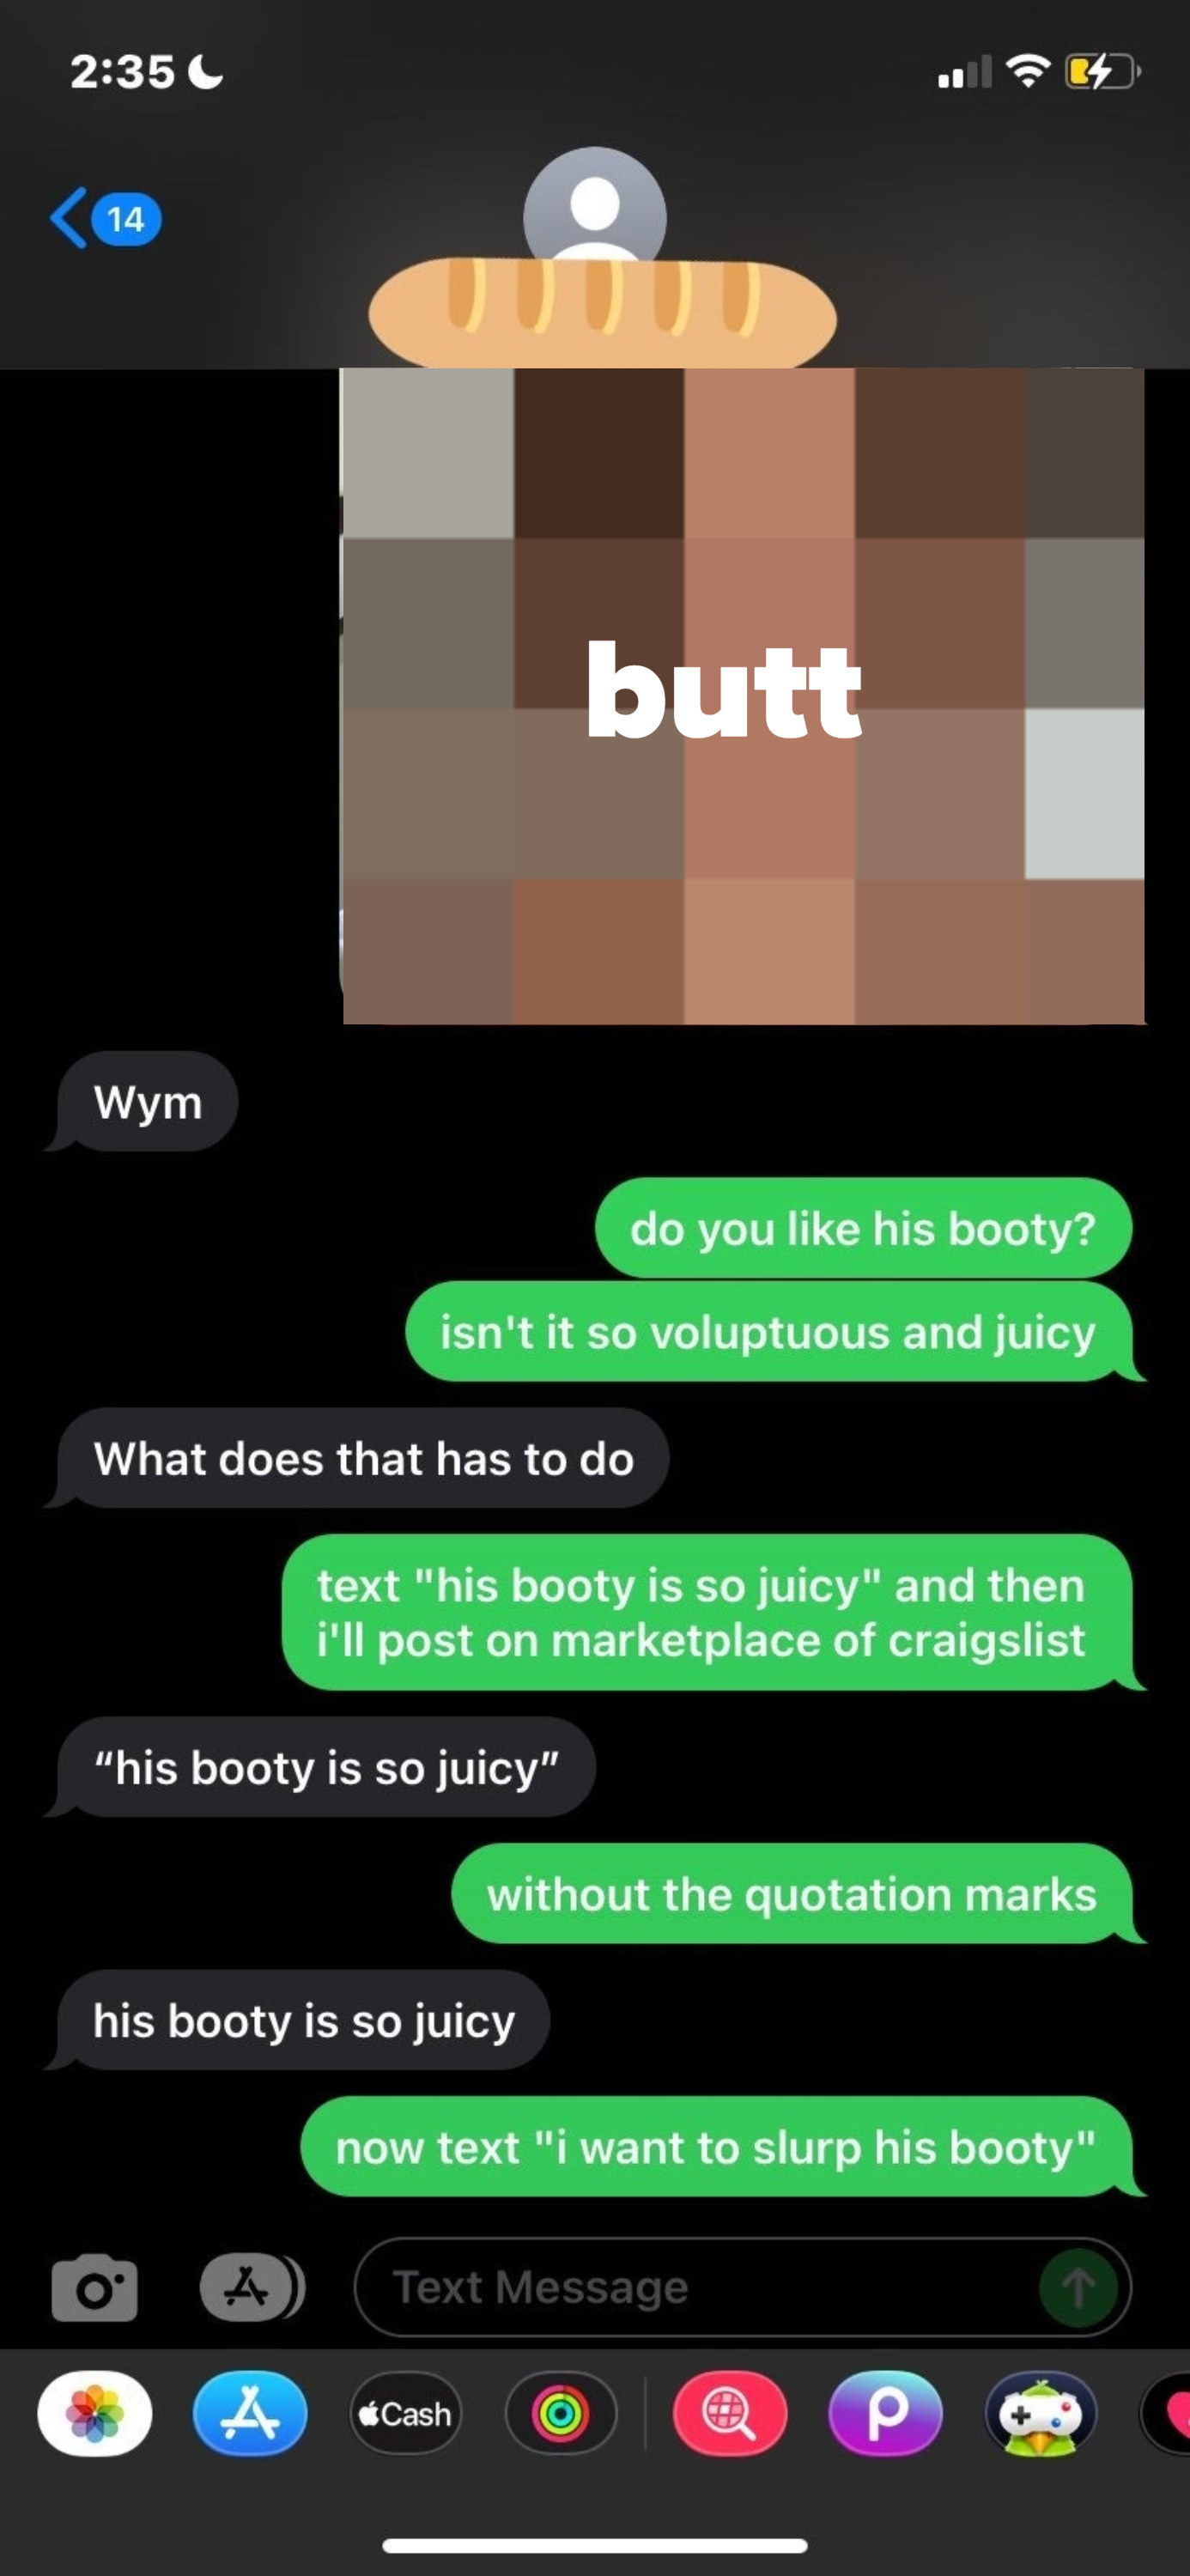 Person who makes a scammer say &quot;his booty is juicy&quot; before proceeding with a scam